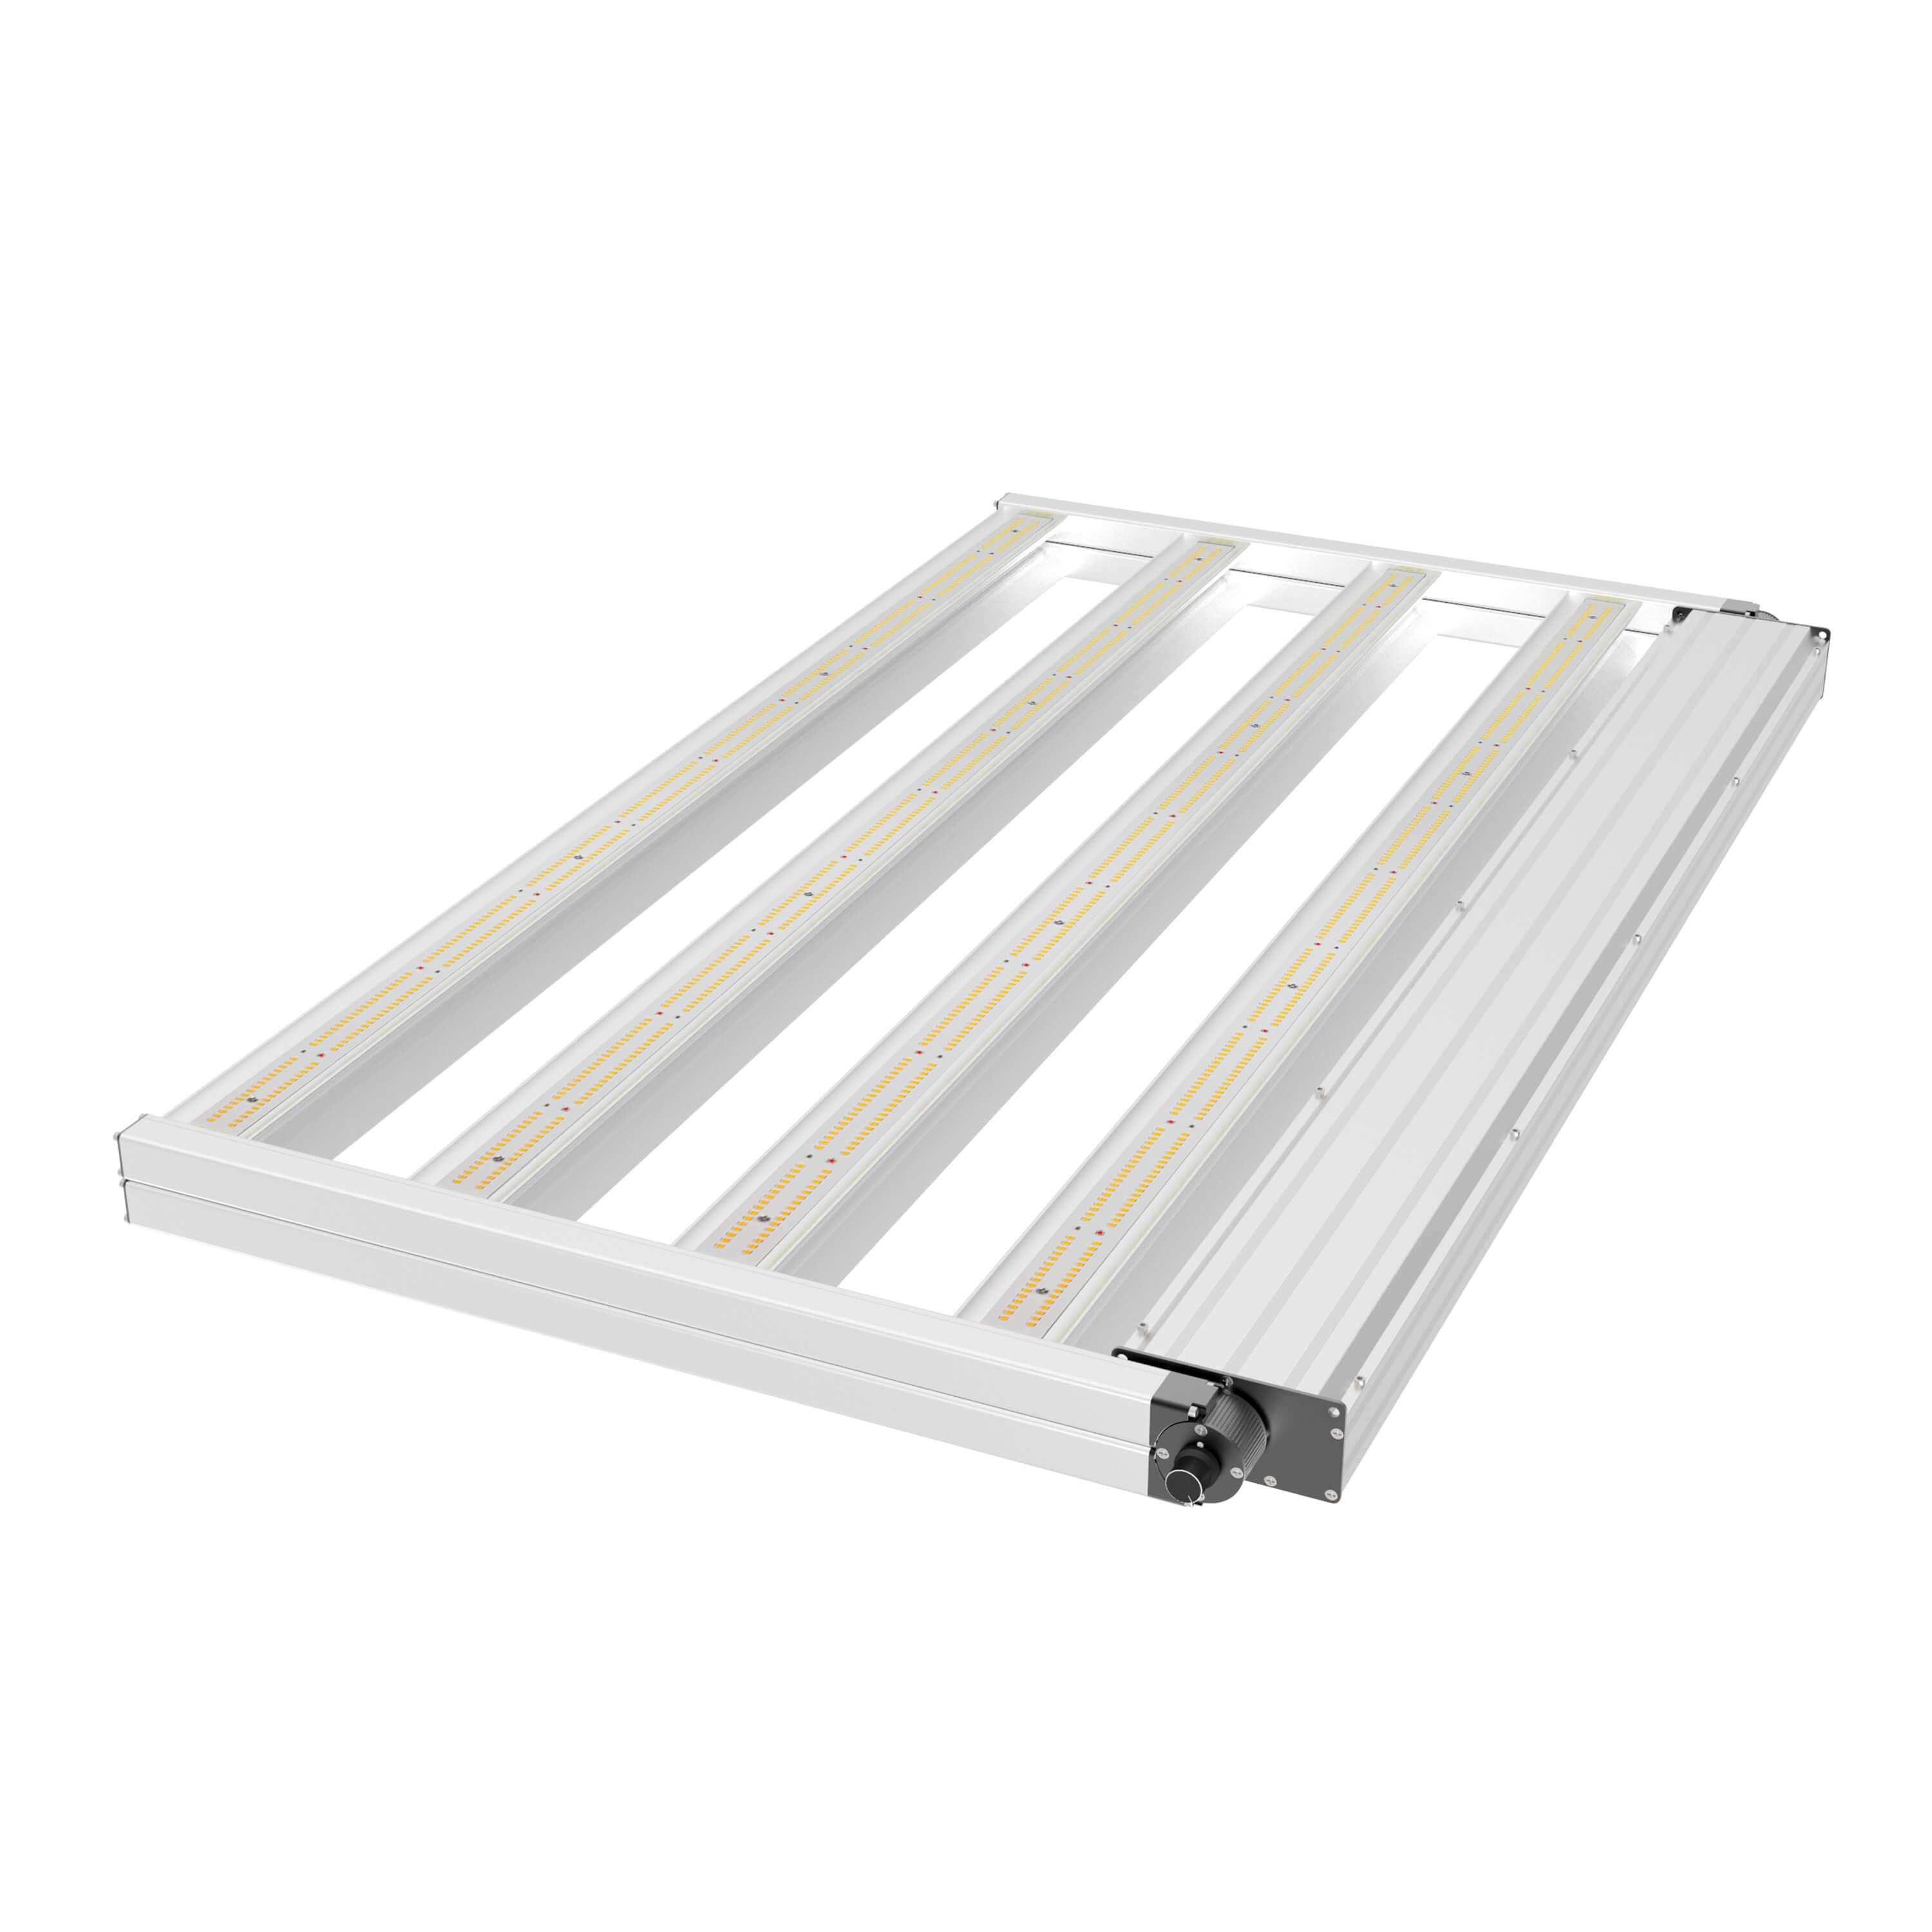 CT-720 Full Spectrum LED Grow Light - 720 Watts, 5'x5'/6'x6', Dimmable, High Efficacy, Commercial Use | Cultiuana